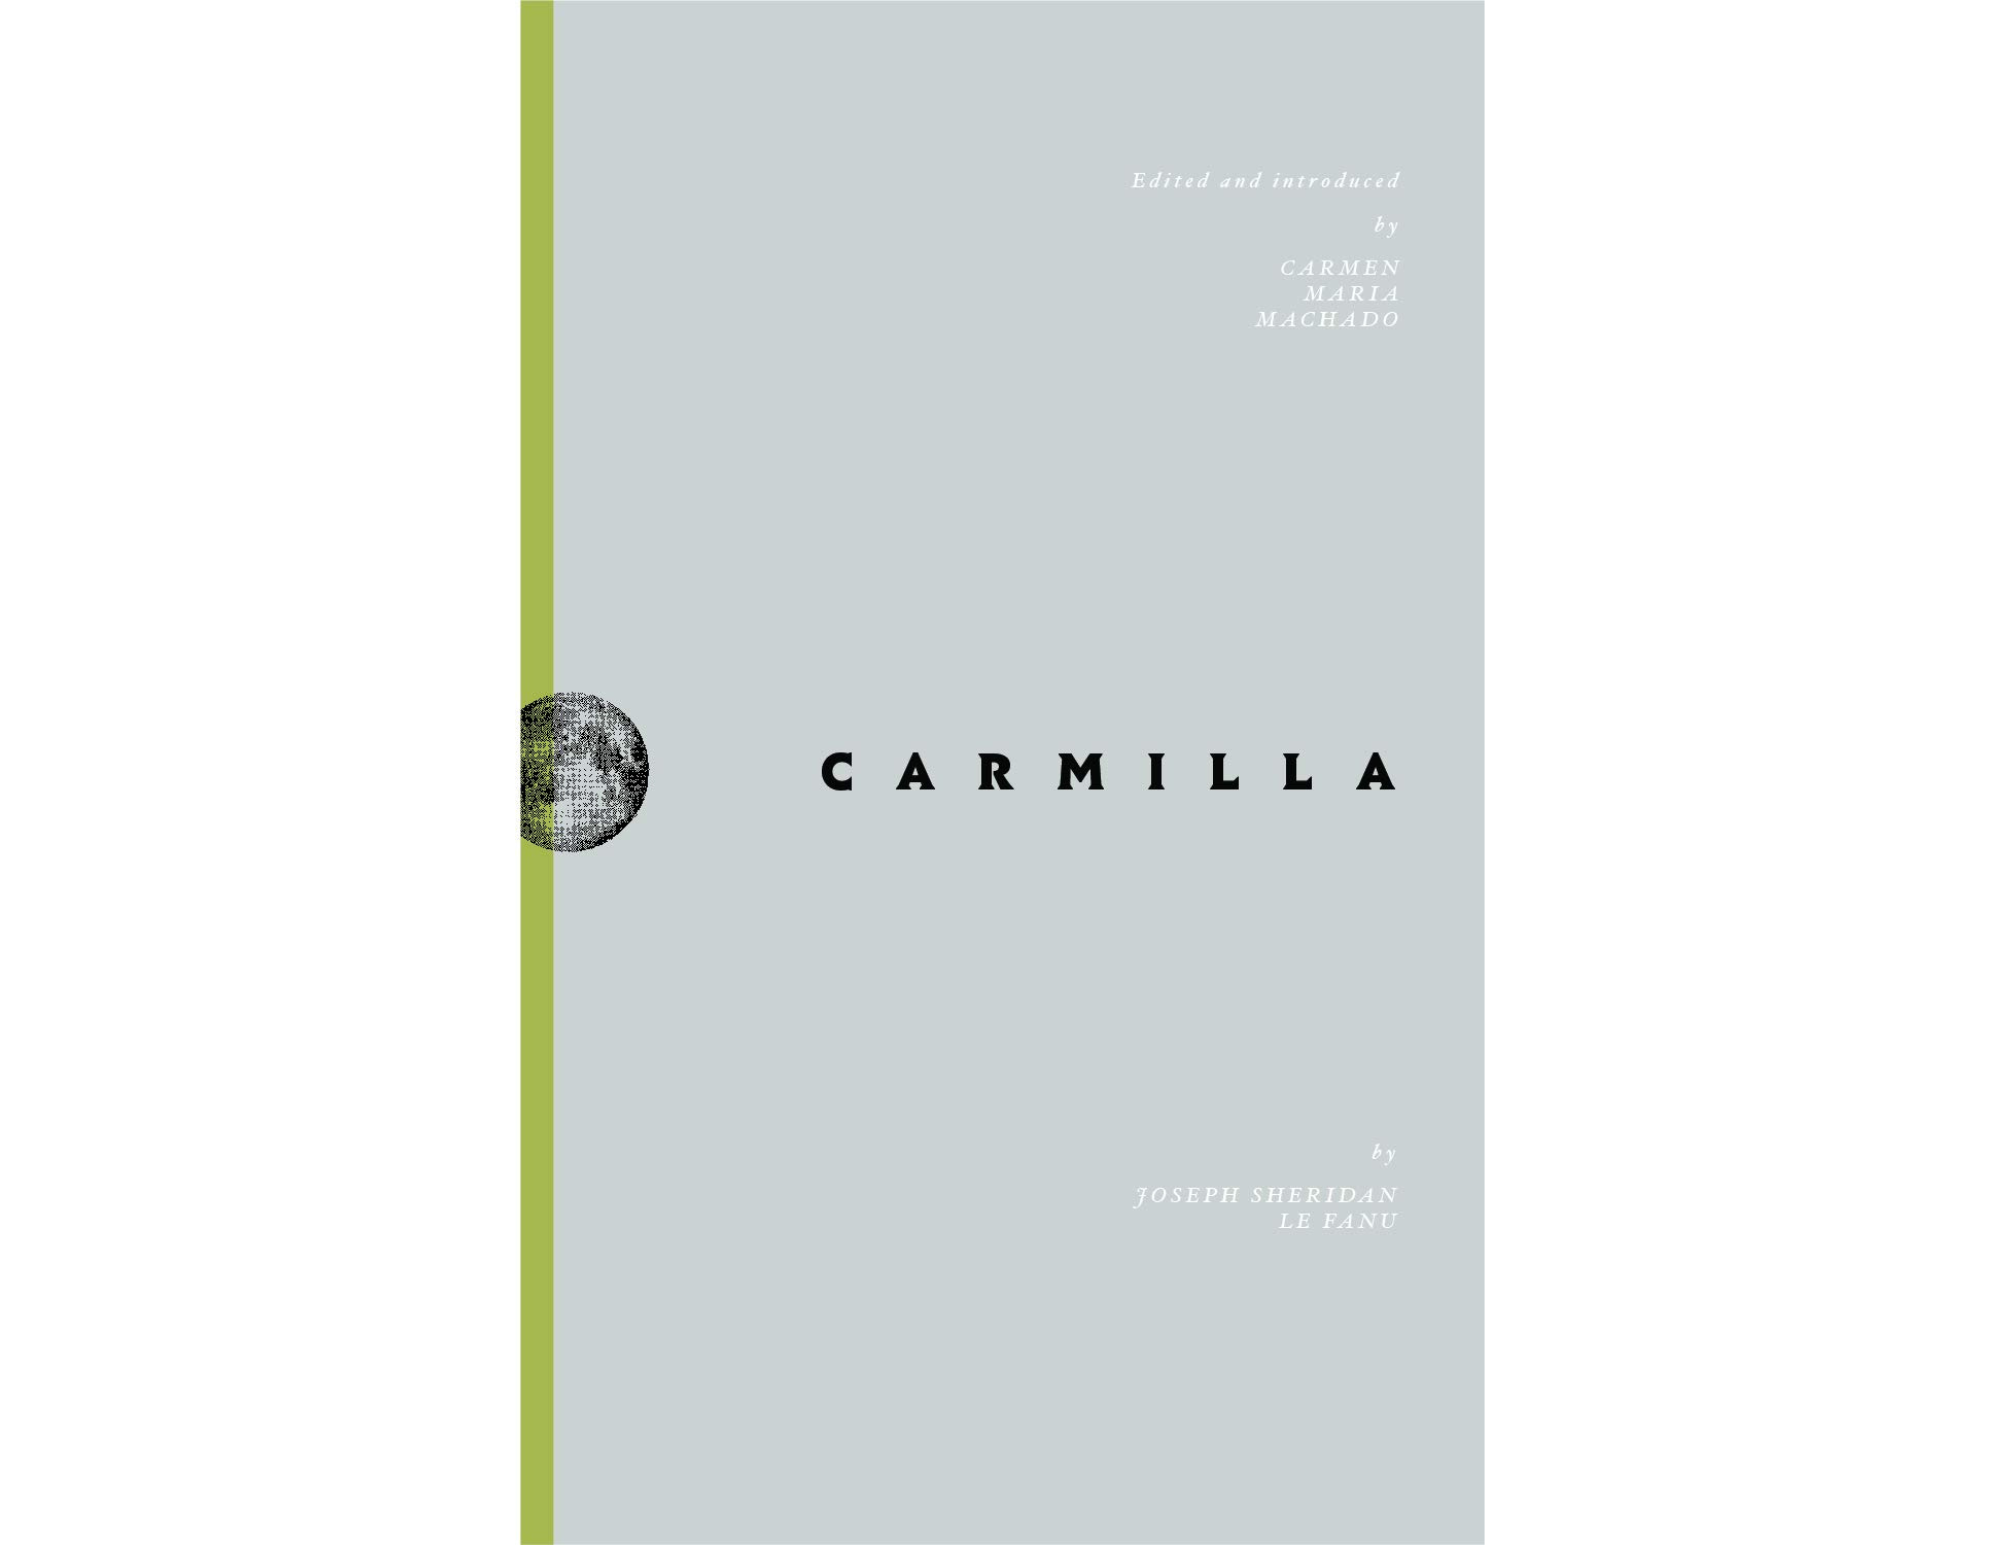 Carmilla and ‘Bearing Shame’: How Annotations Enhance a Work